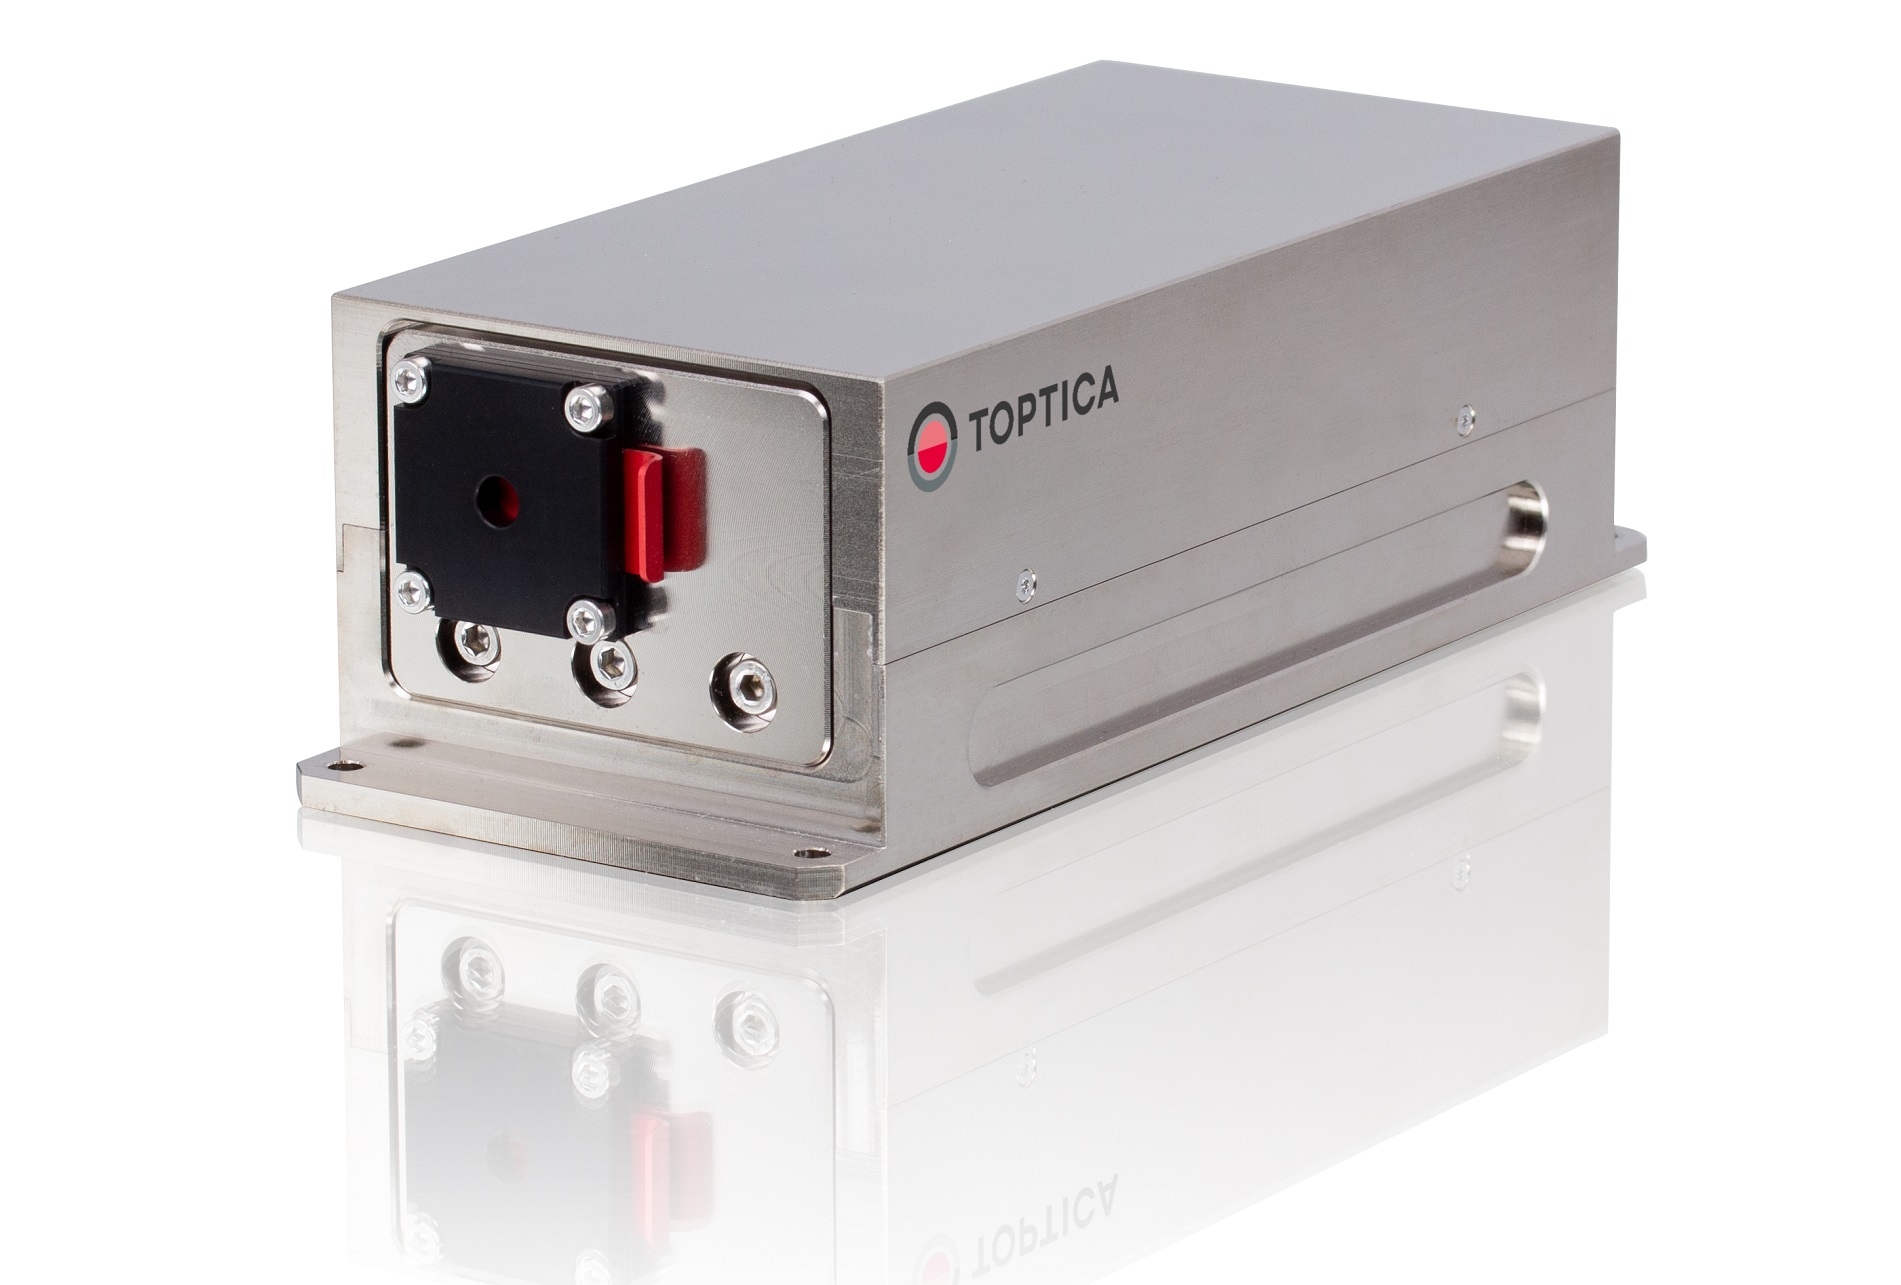 TOPTICA’s TopMode lasers operate as easily as a HeNe, but also offer higher power and the choice of wavelength.